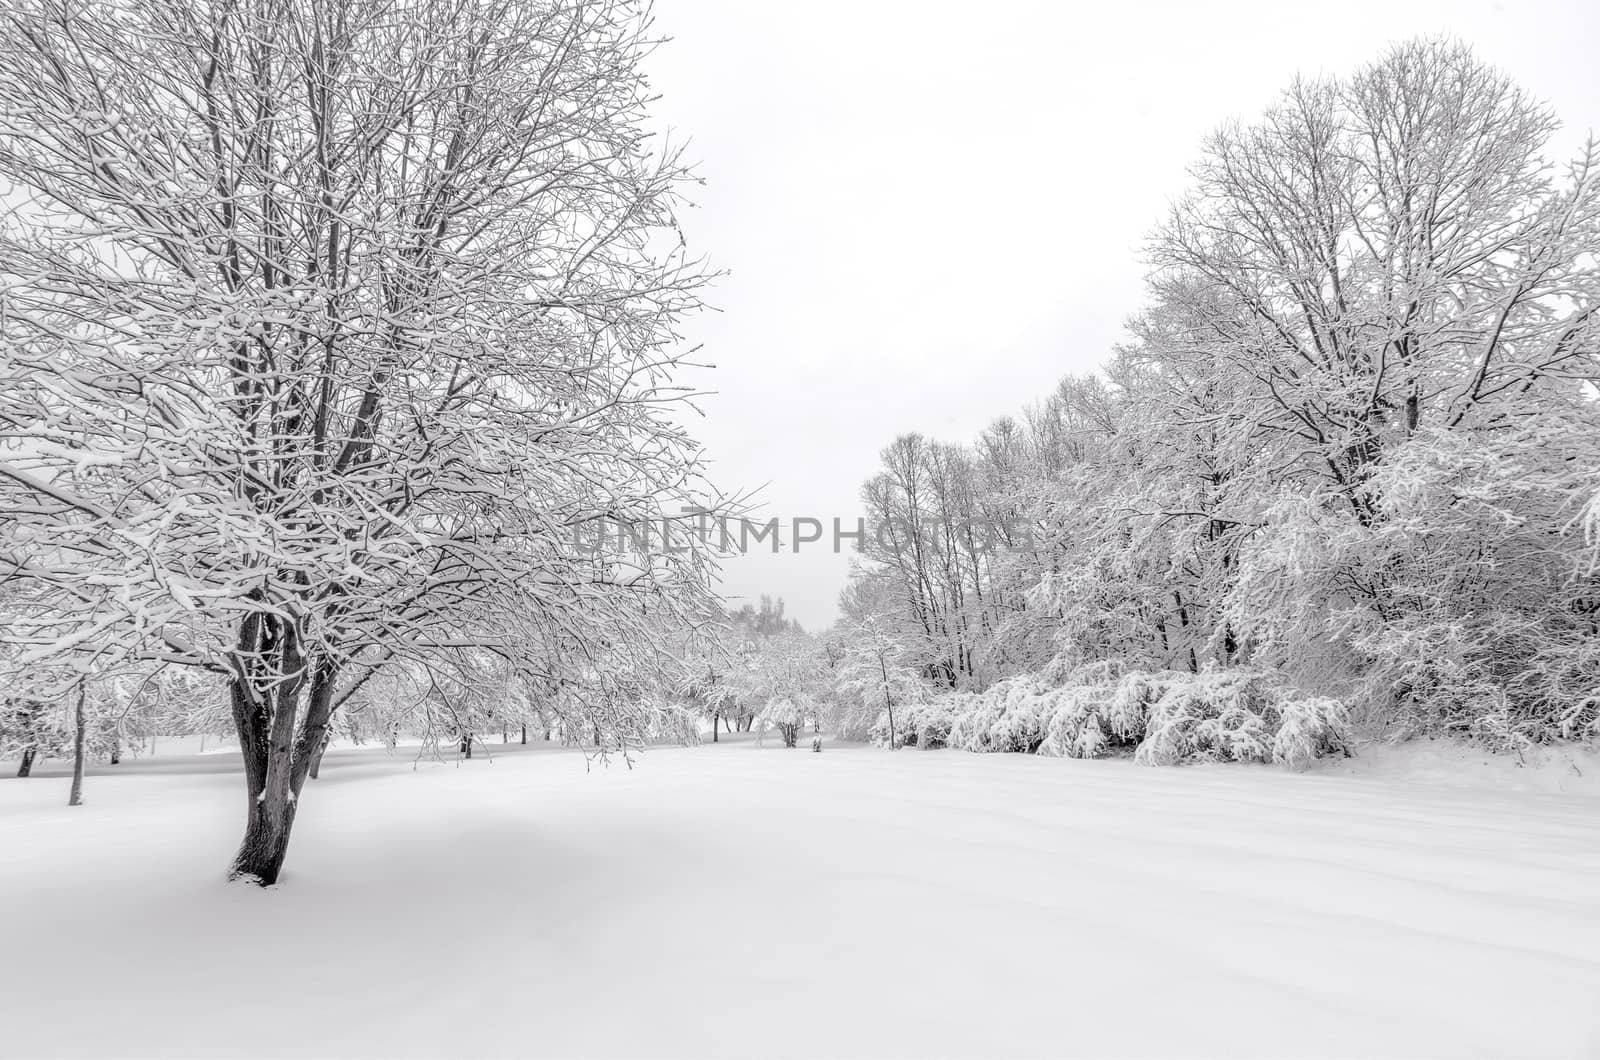 Winter with snow on trees by praethip